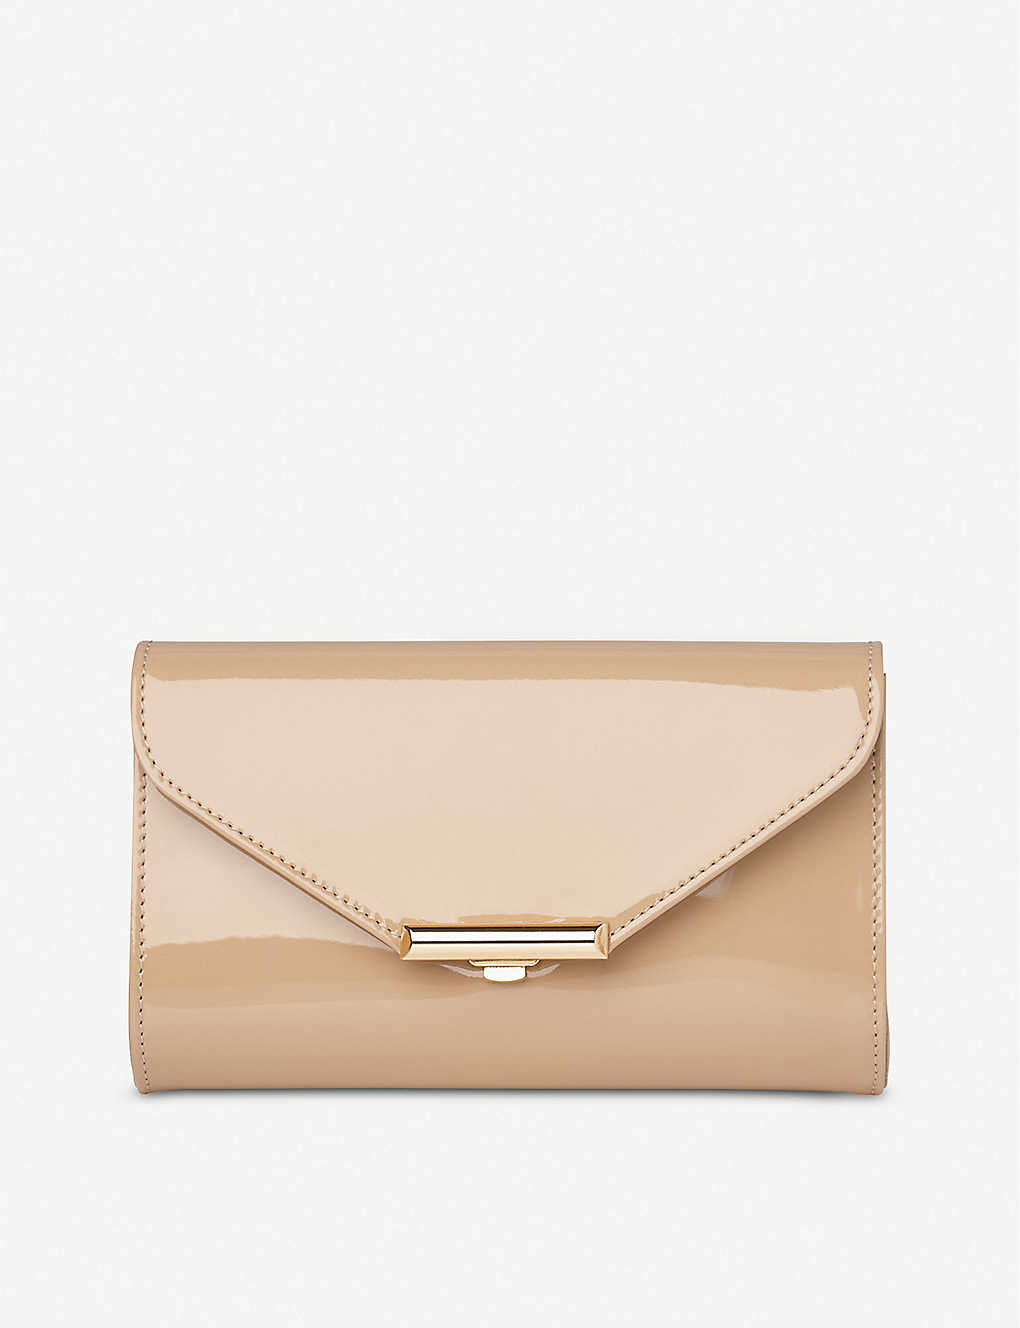 Lk Bennett Lucy Patent Leather Clutch In Bei-trench